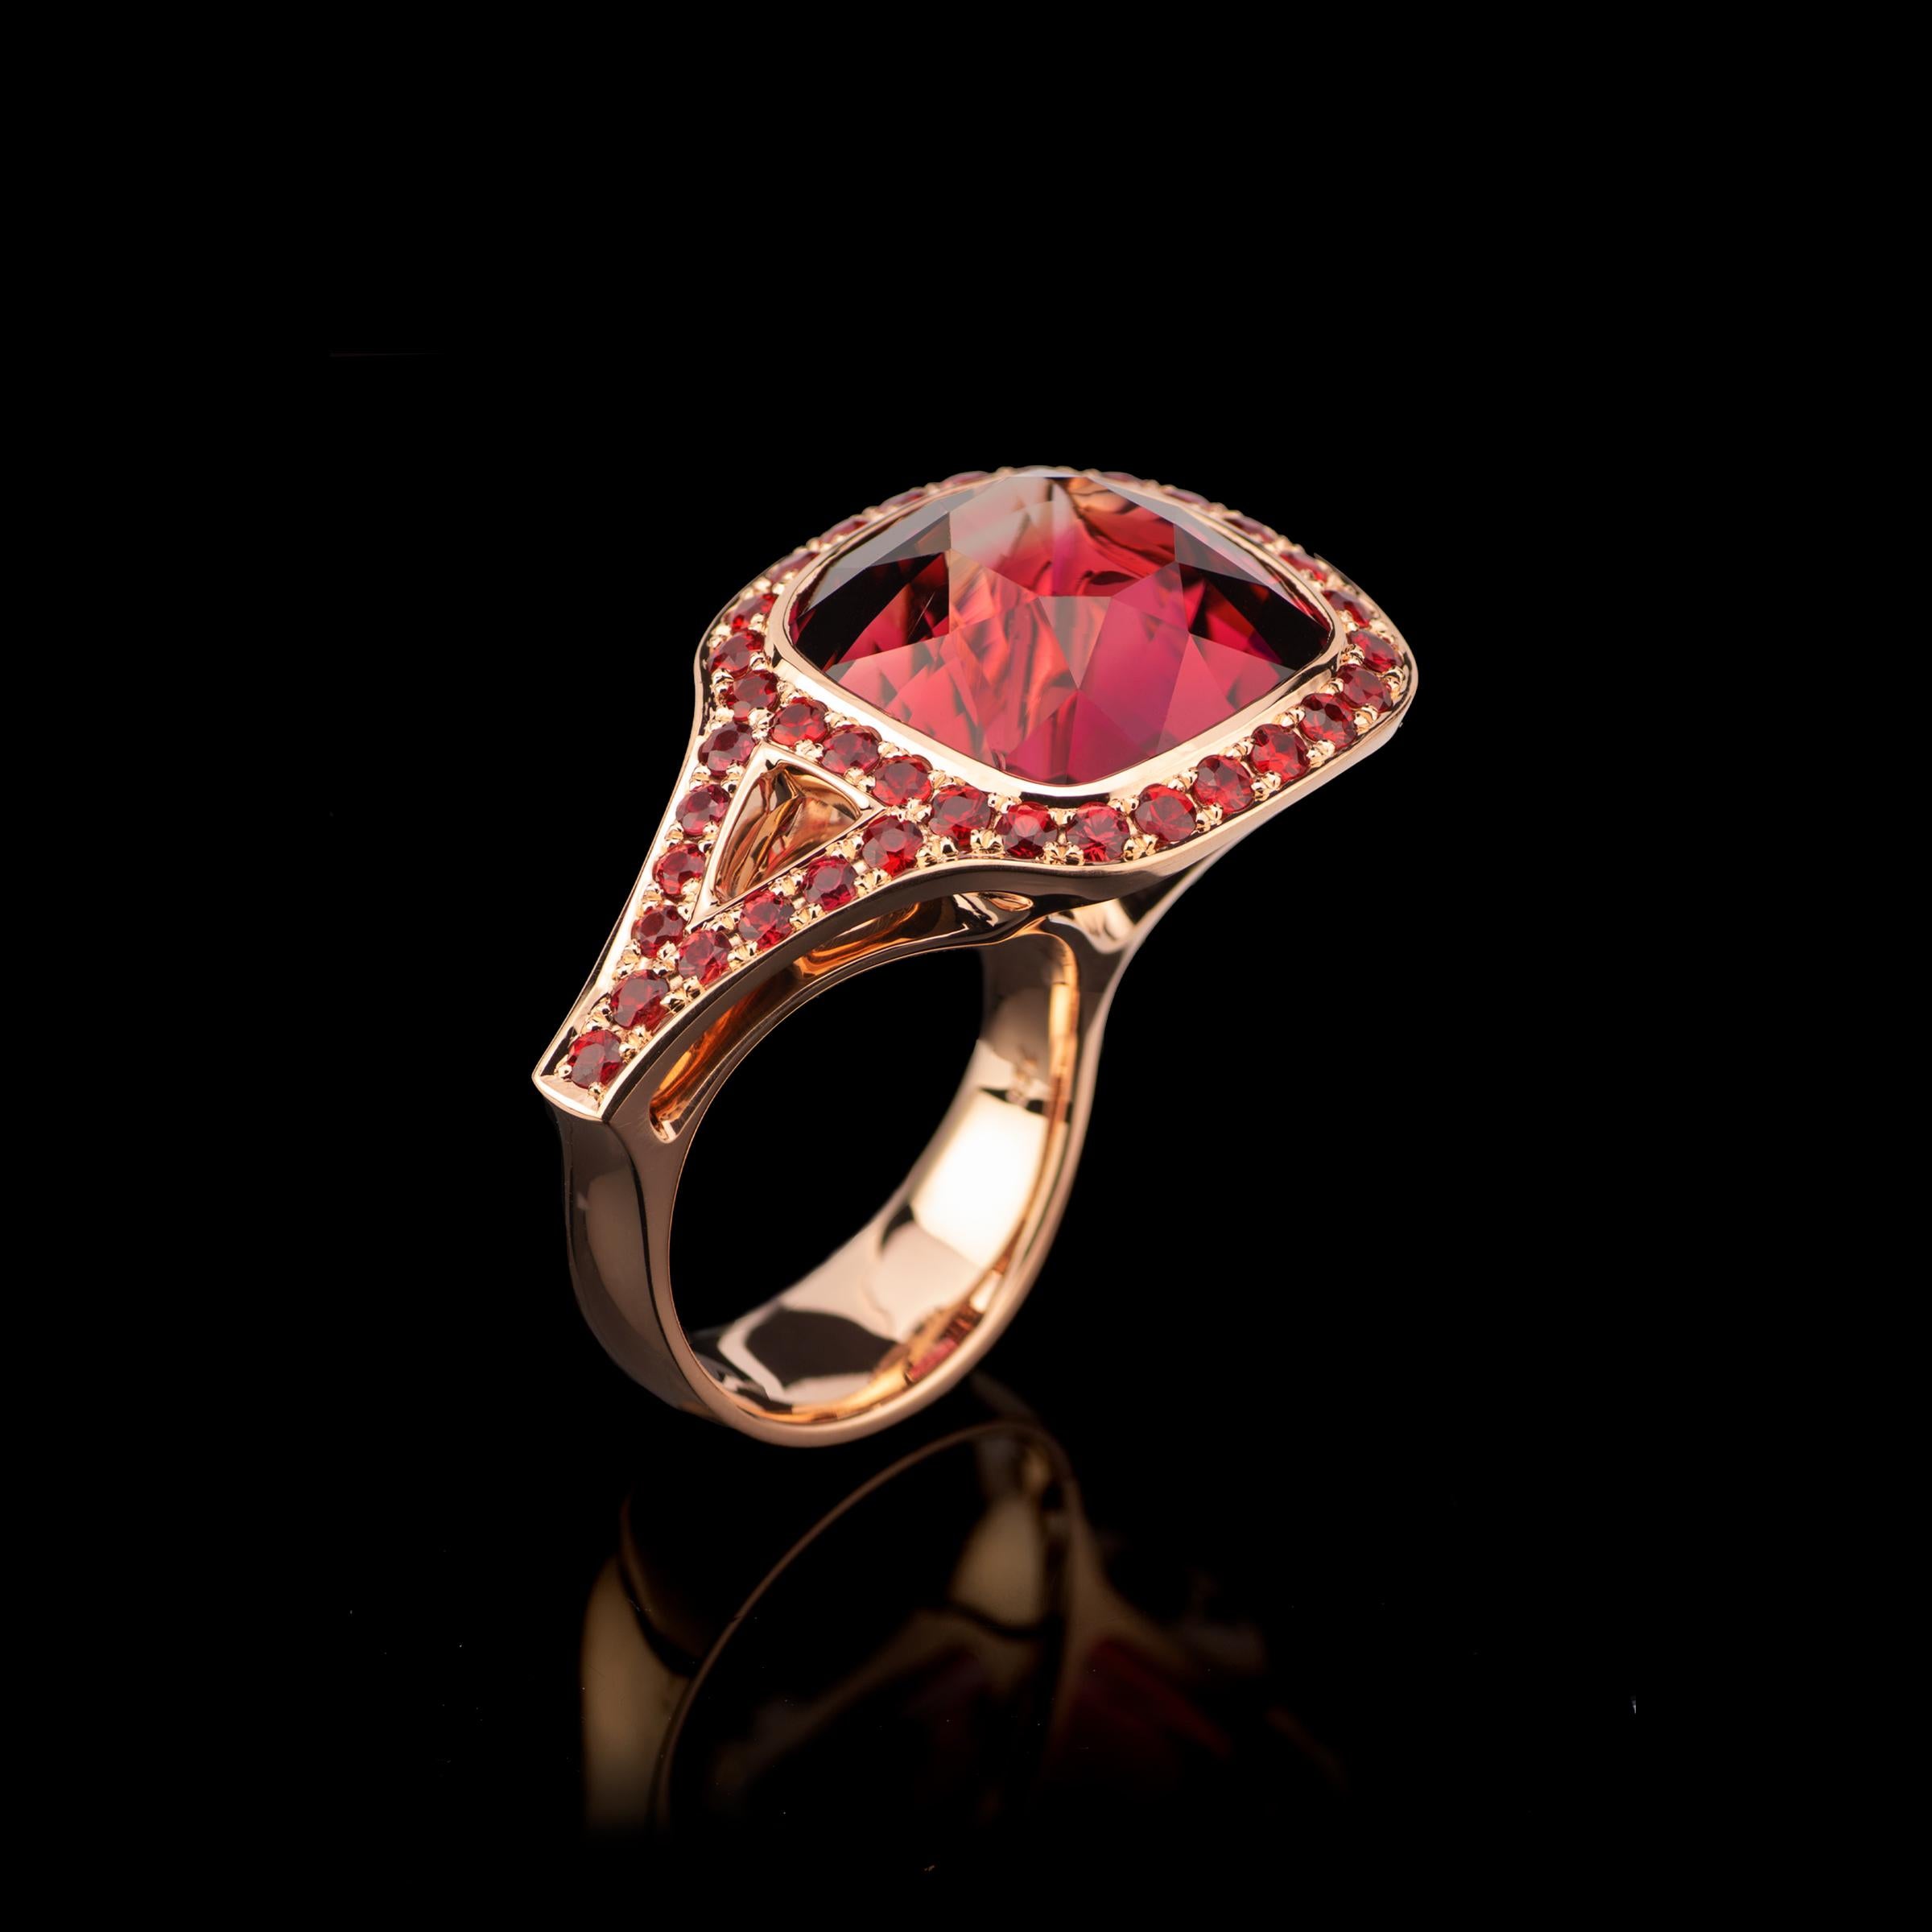 Cushion Cut Tourmaline cocktail ring 18.66ct red, 18k rose gold, 35 hand set red sapphires For Sale